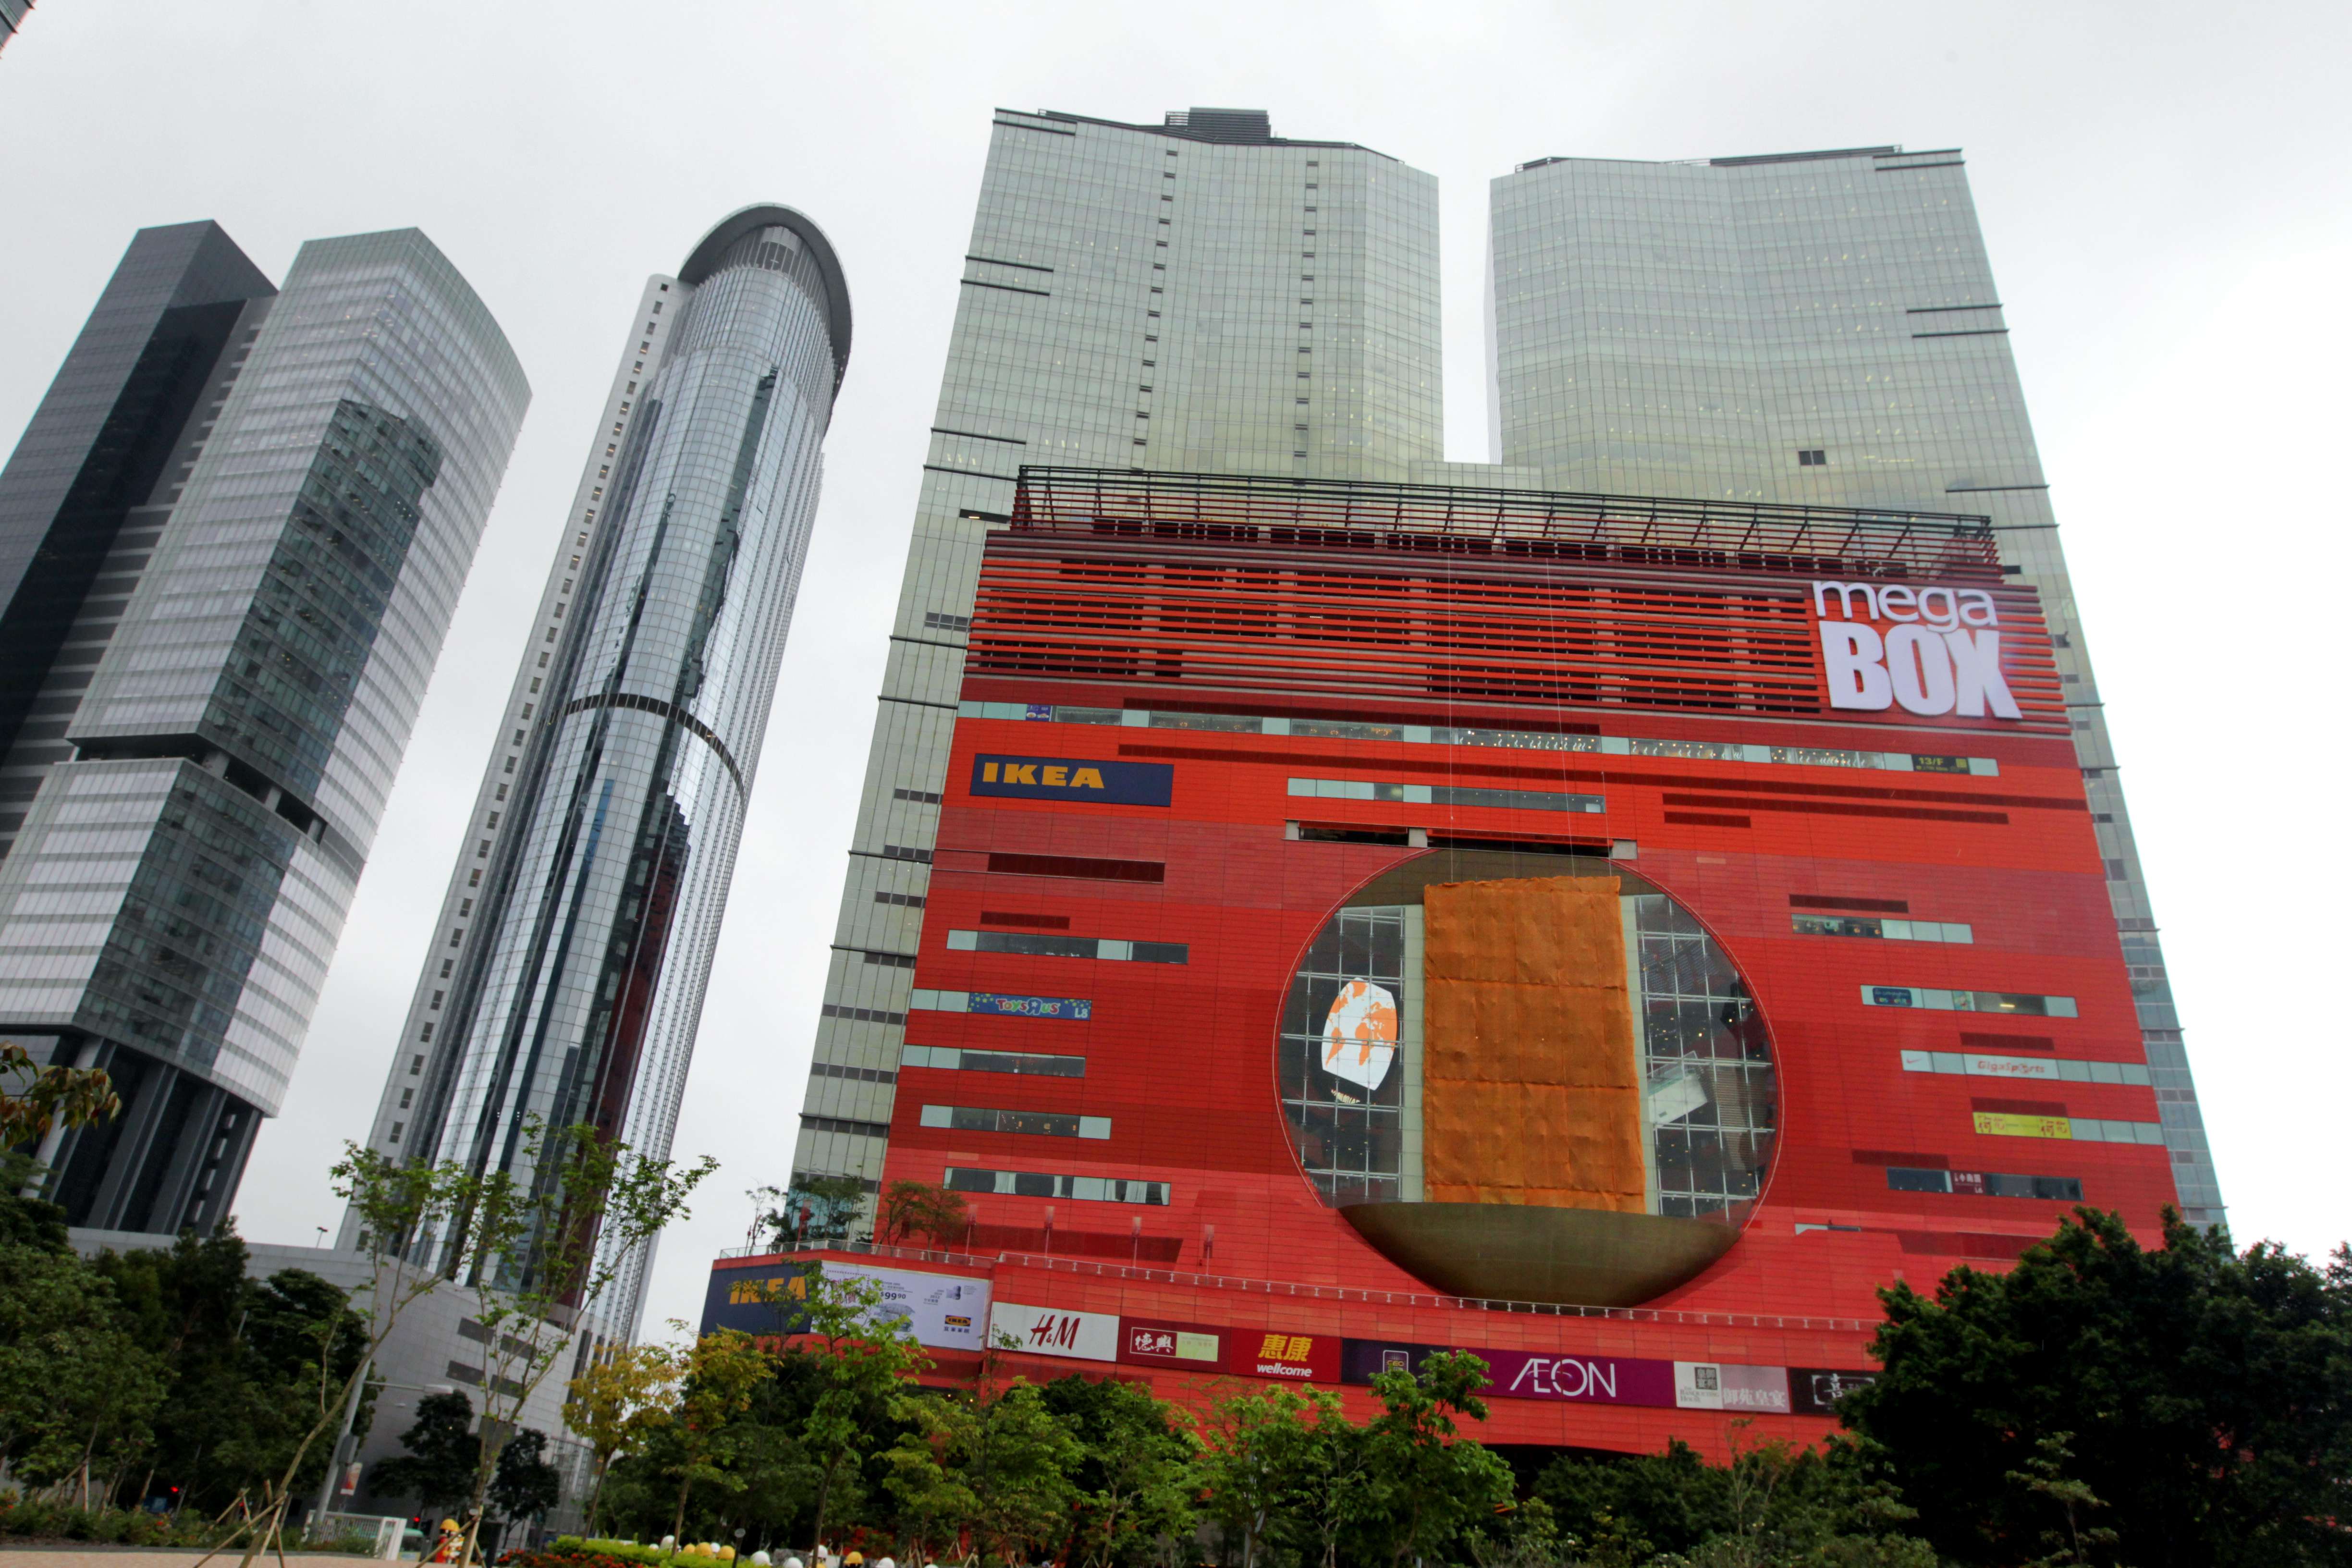 The MegaBox shopping centre in Kowloon. Not so long ago the area was considered by many in the property industry as not suitable for large multinational companies. Photo: Felix Wong